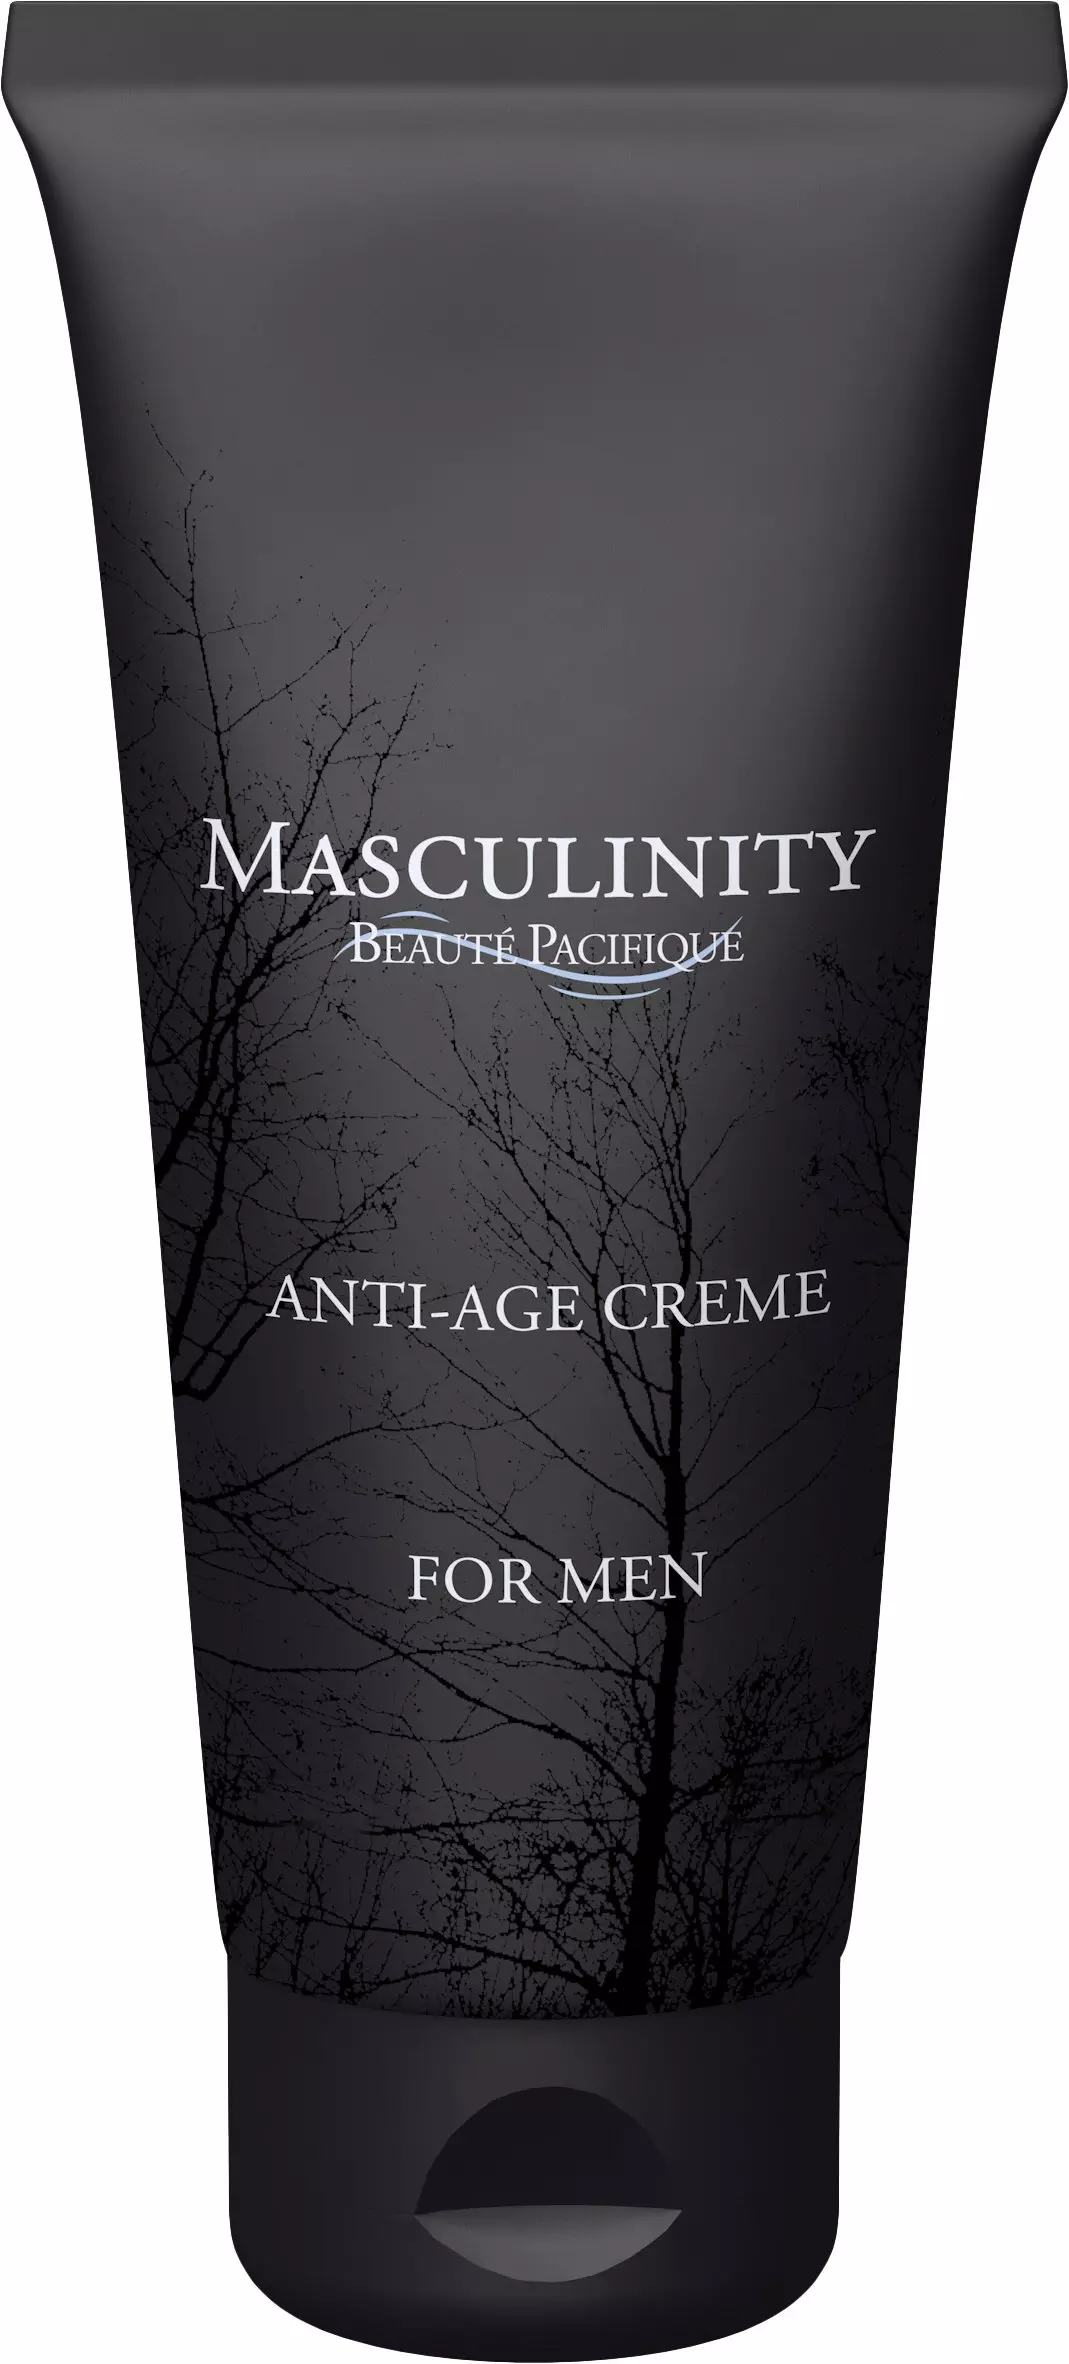 Beaute Pacifique Masculinity Anti-Age Creme For